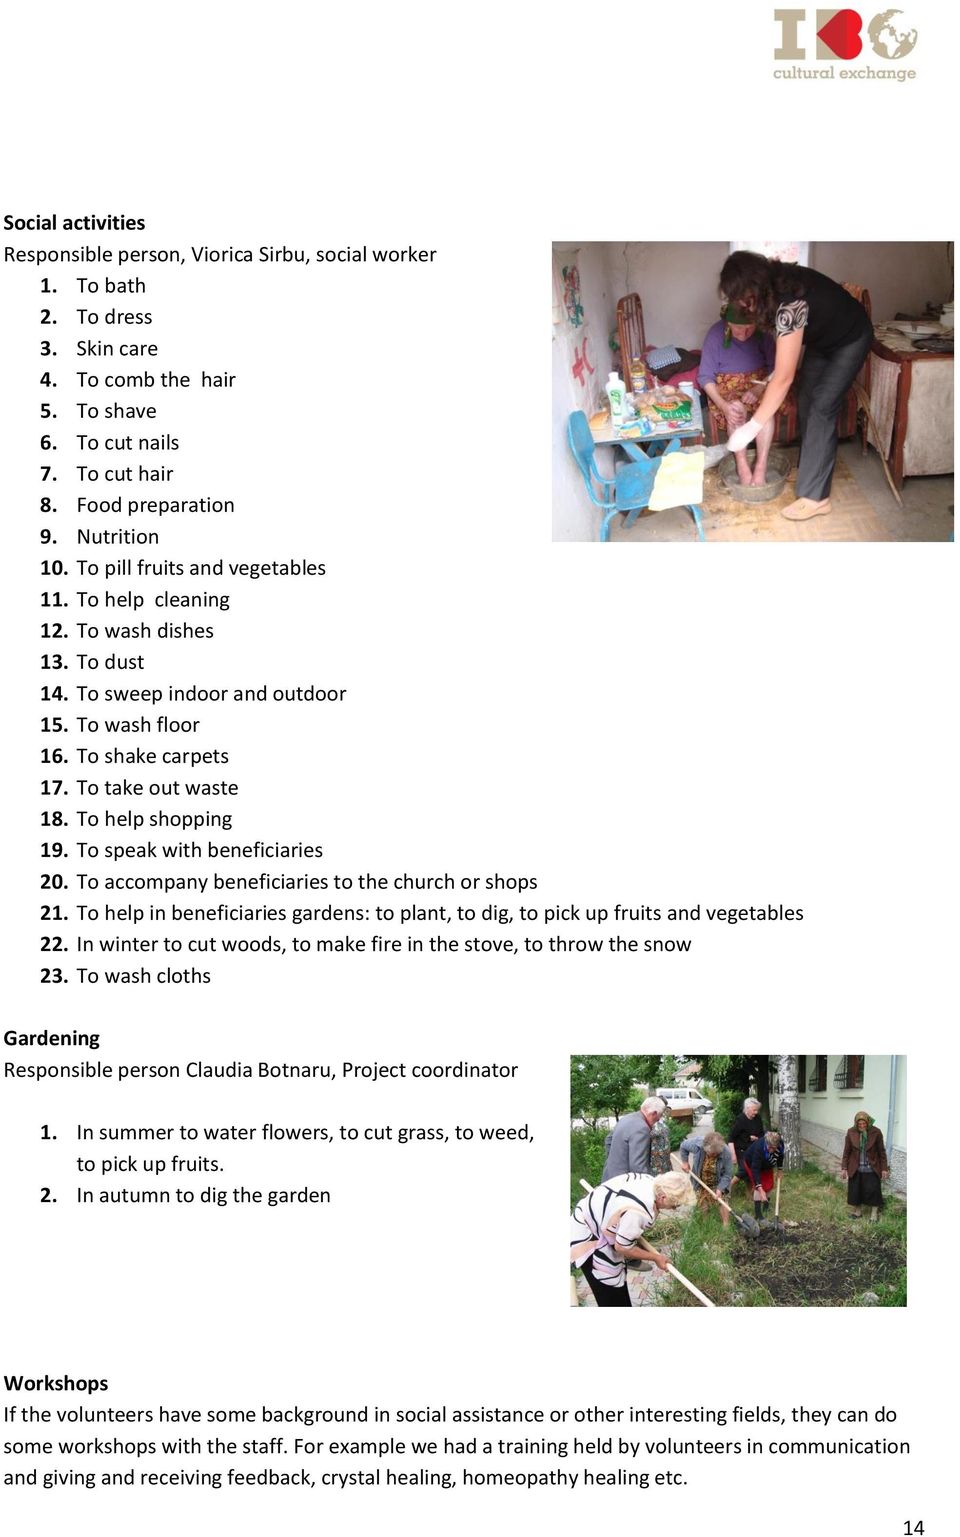 To help shopping 19. To speak with beneficiaries 20. To accompany beneficiaries to the church or shops 21. To help in beneficiaries gardens: to plant, to dig, to pick up fruits and vegetables 22.